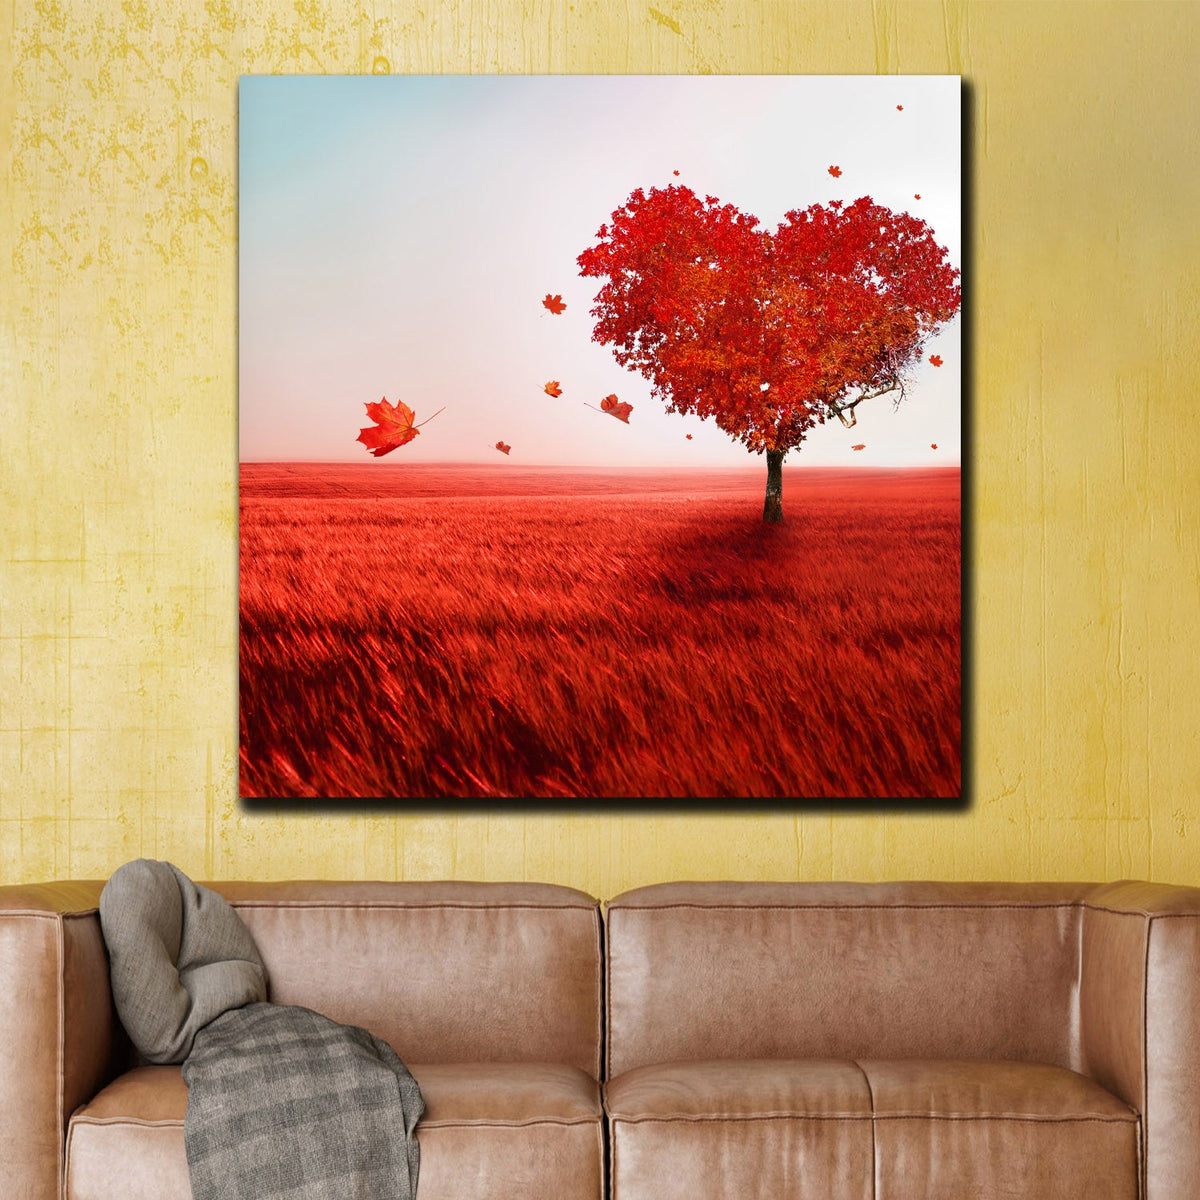 https://cdn.shopify.com/s/files/1/0387/9986/8044/products/TreeofLoveCanvasArtprintStretched-3.jpg